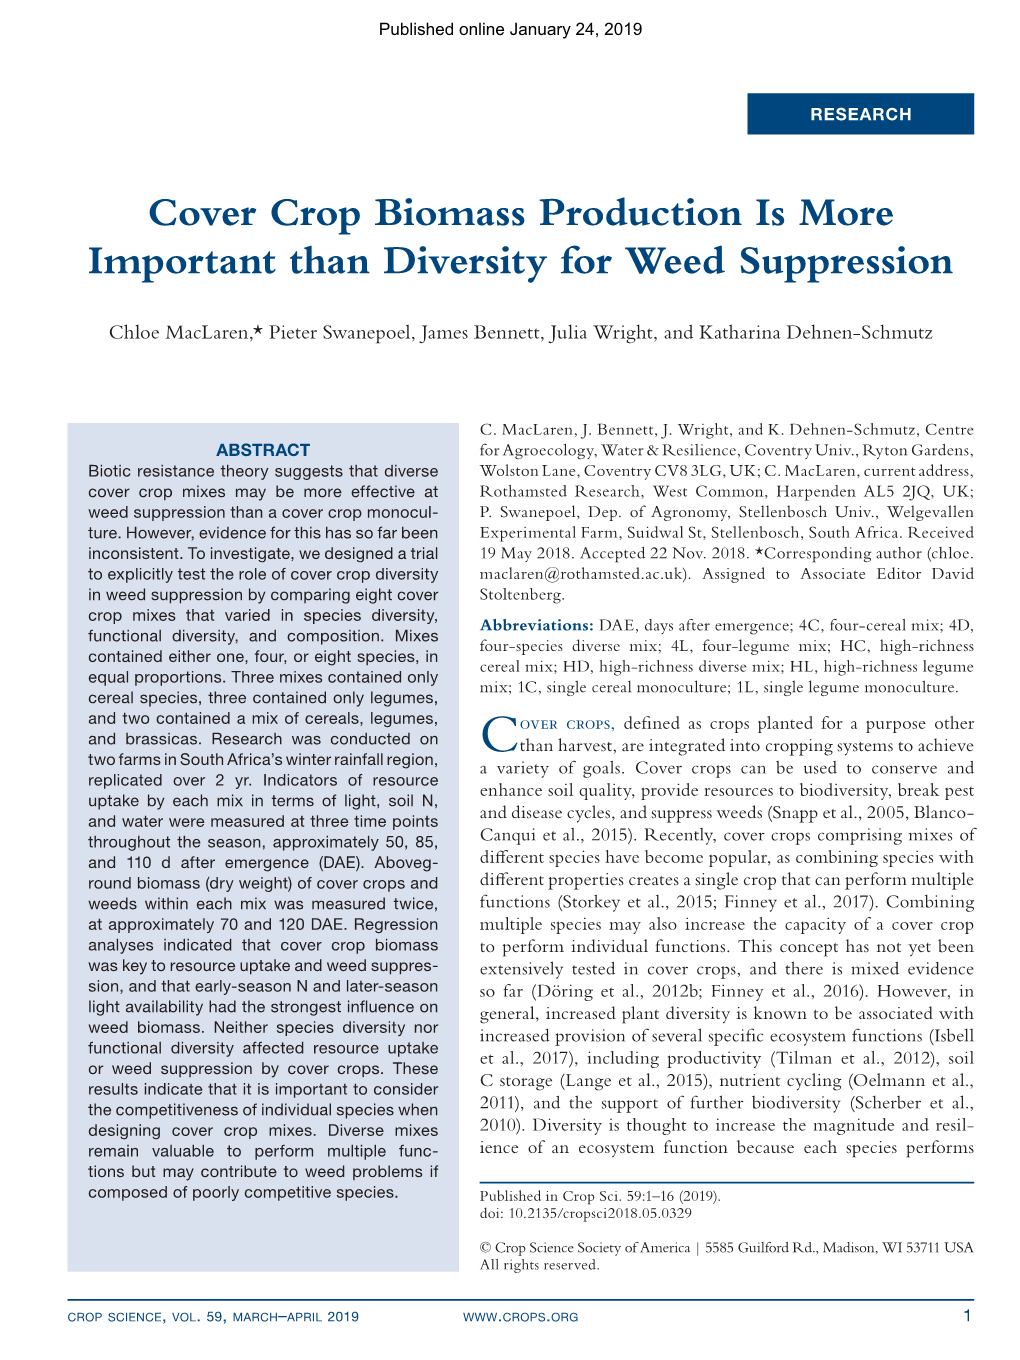 Cover Crop Biomass Production Is More Important Than Diversity for Weed Suppression